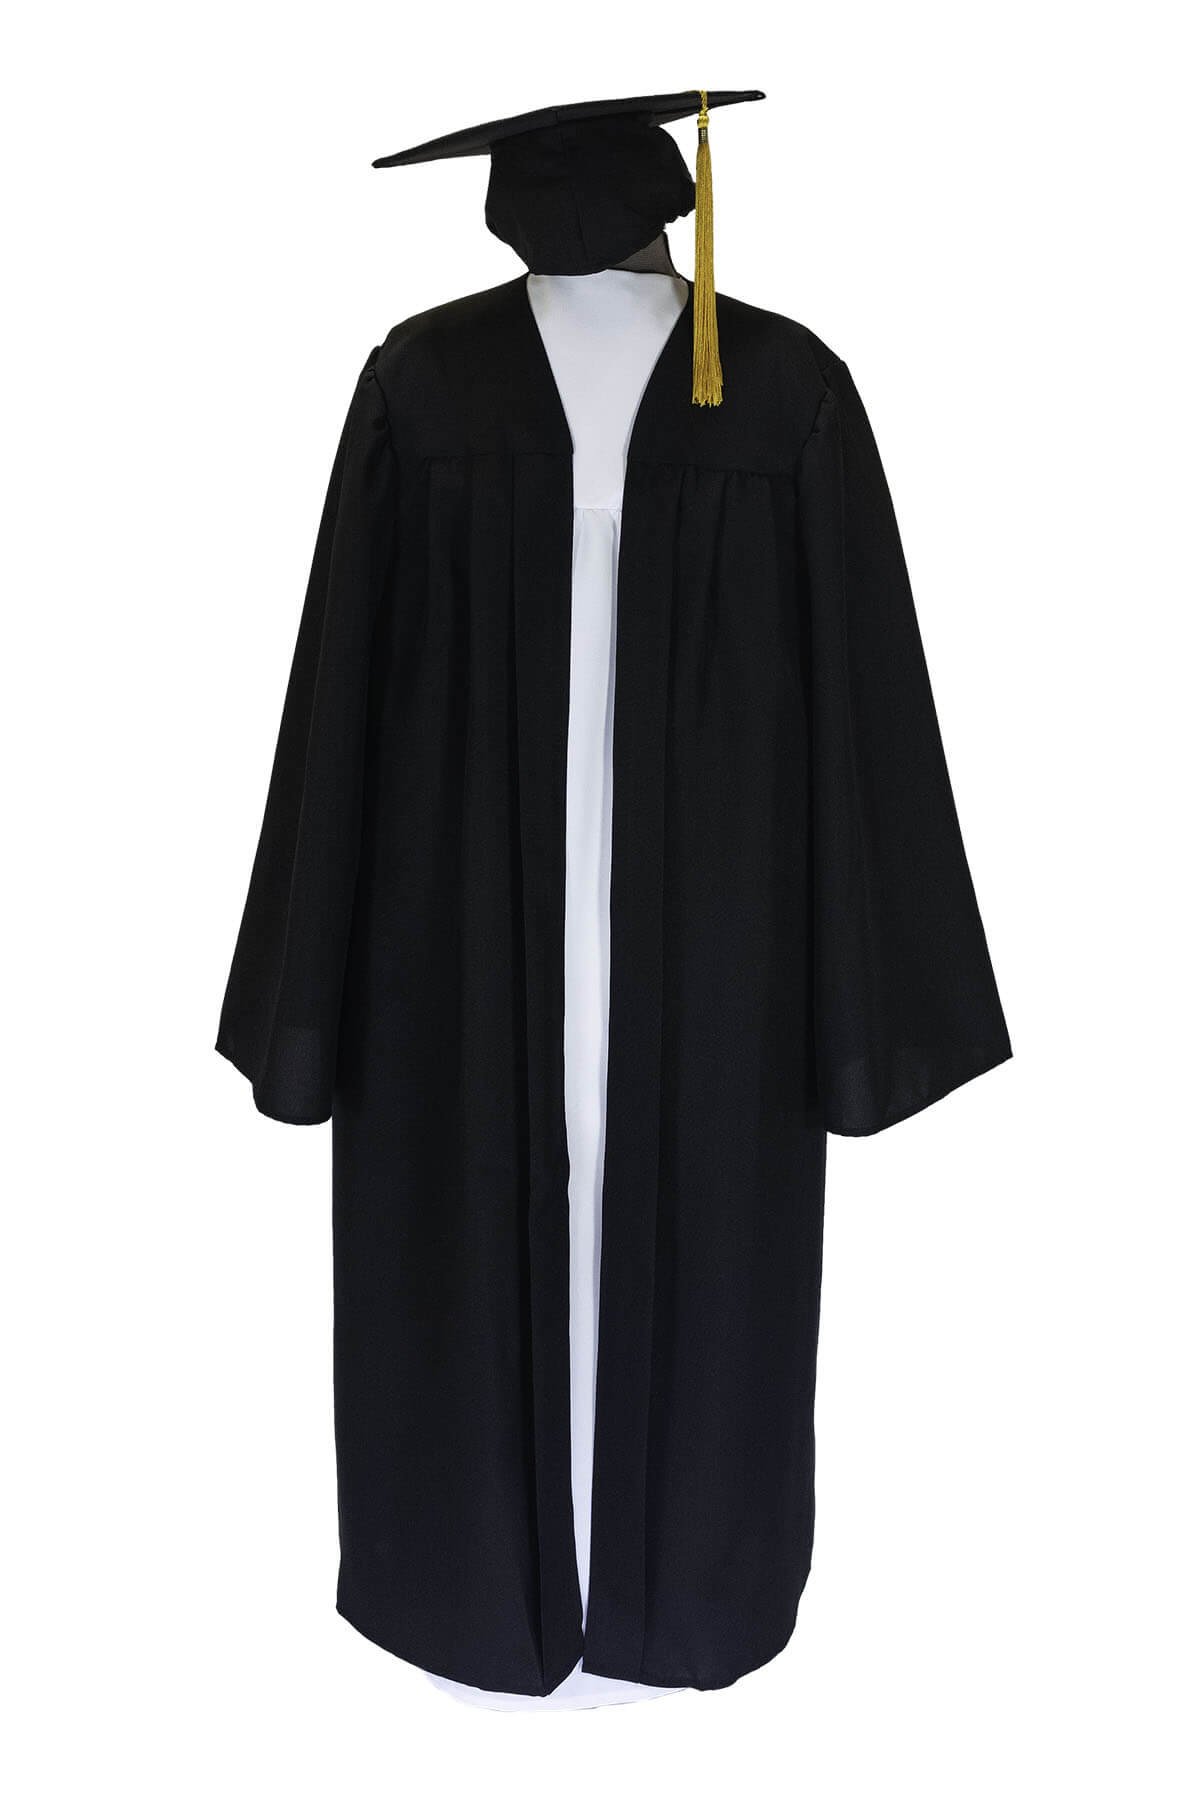 Black and gold Graduation Gown-GGWN 1007-Chest 56 – Costume Cottage